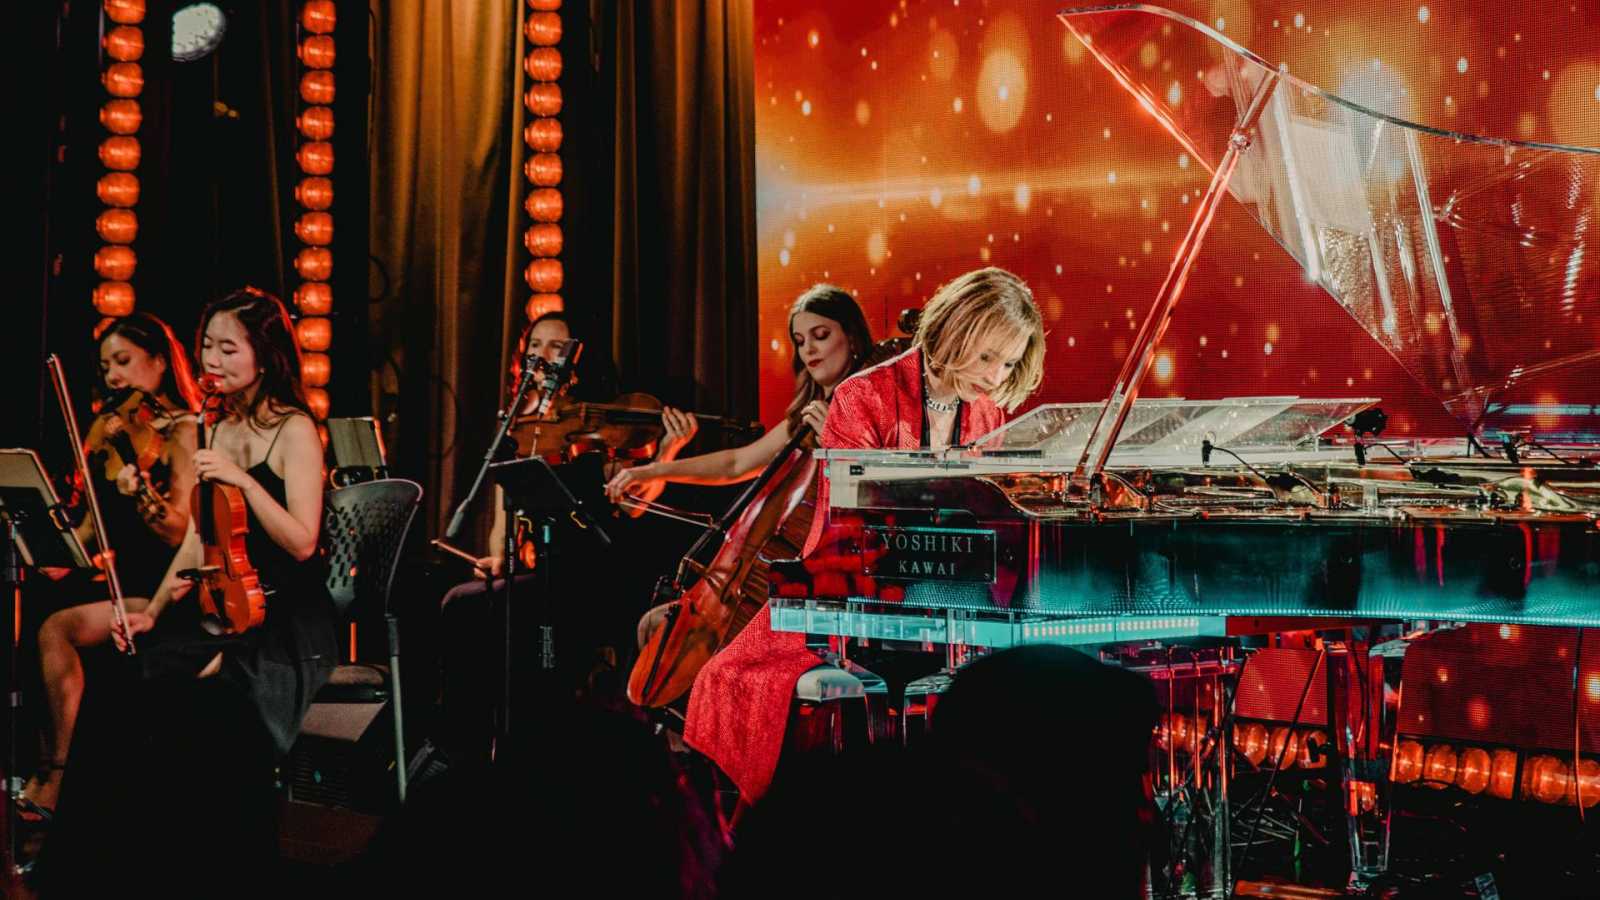 YOSHIKI Press Conference at The GRAMMY Museum, Los Angeles © YOSHIKI. All rights reserved.